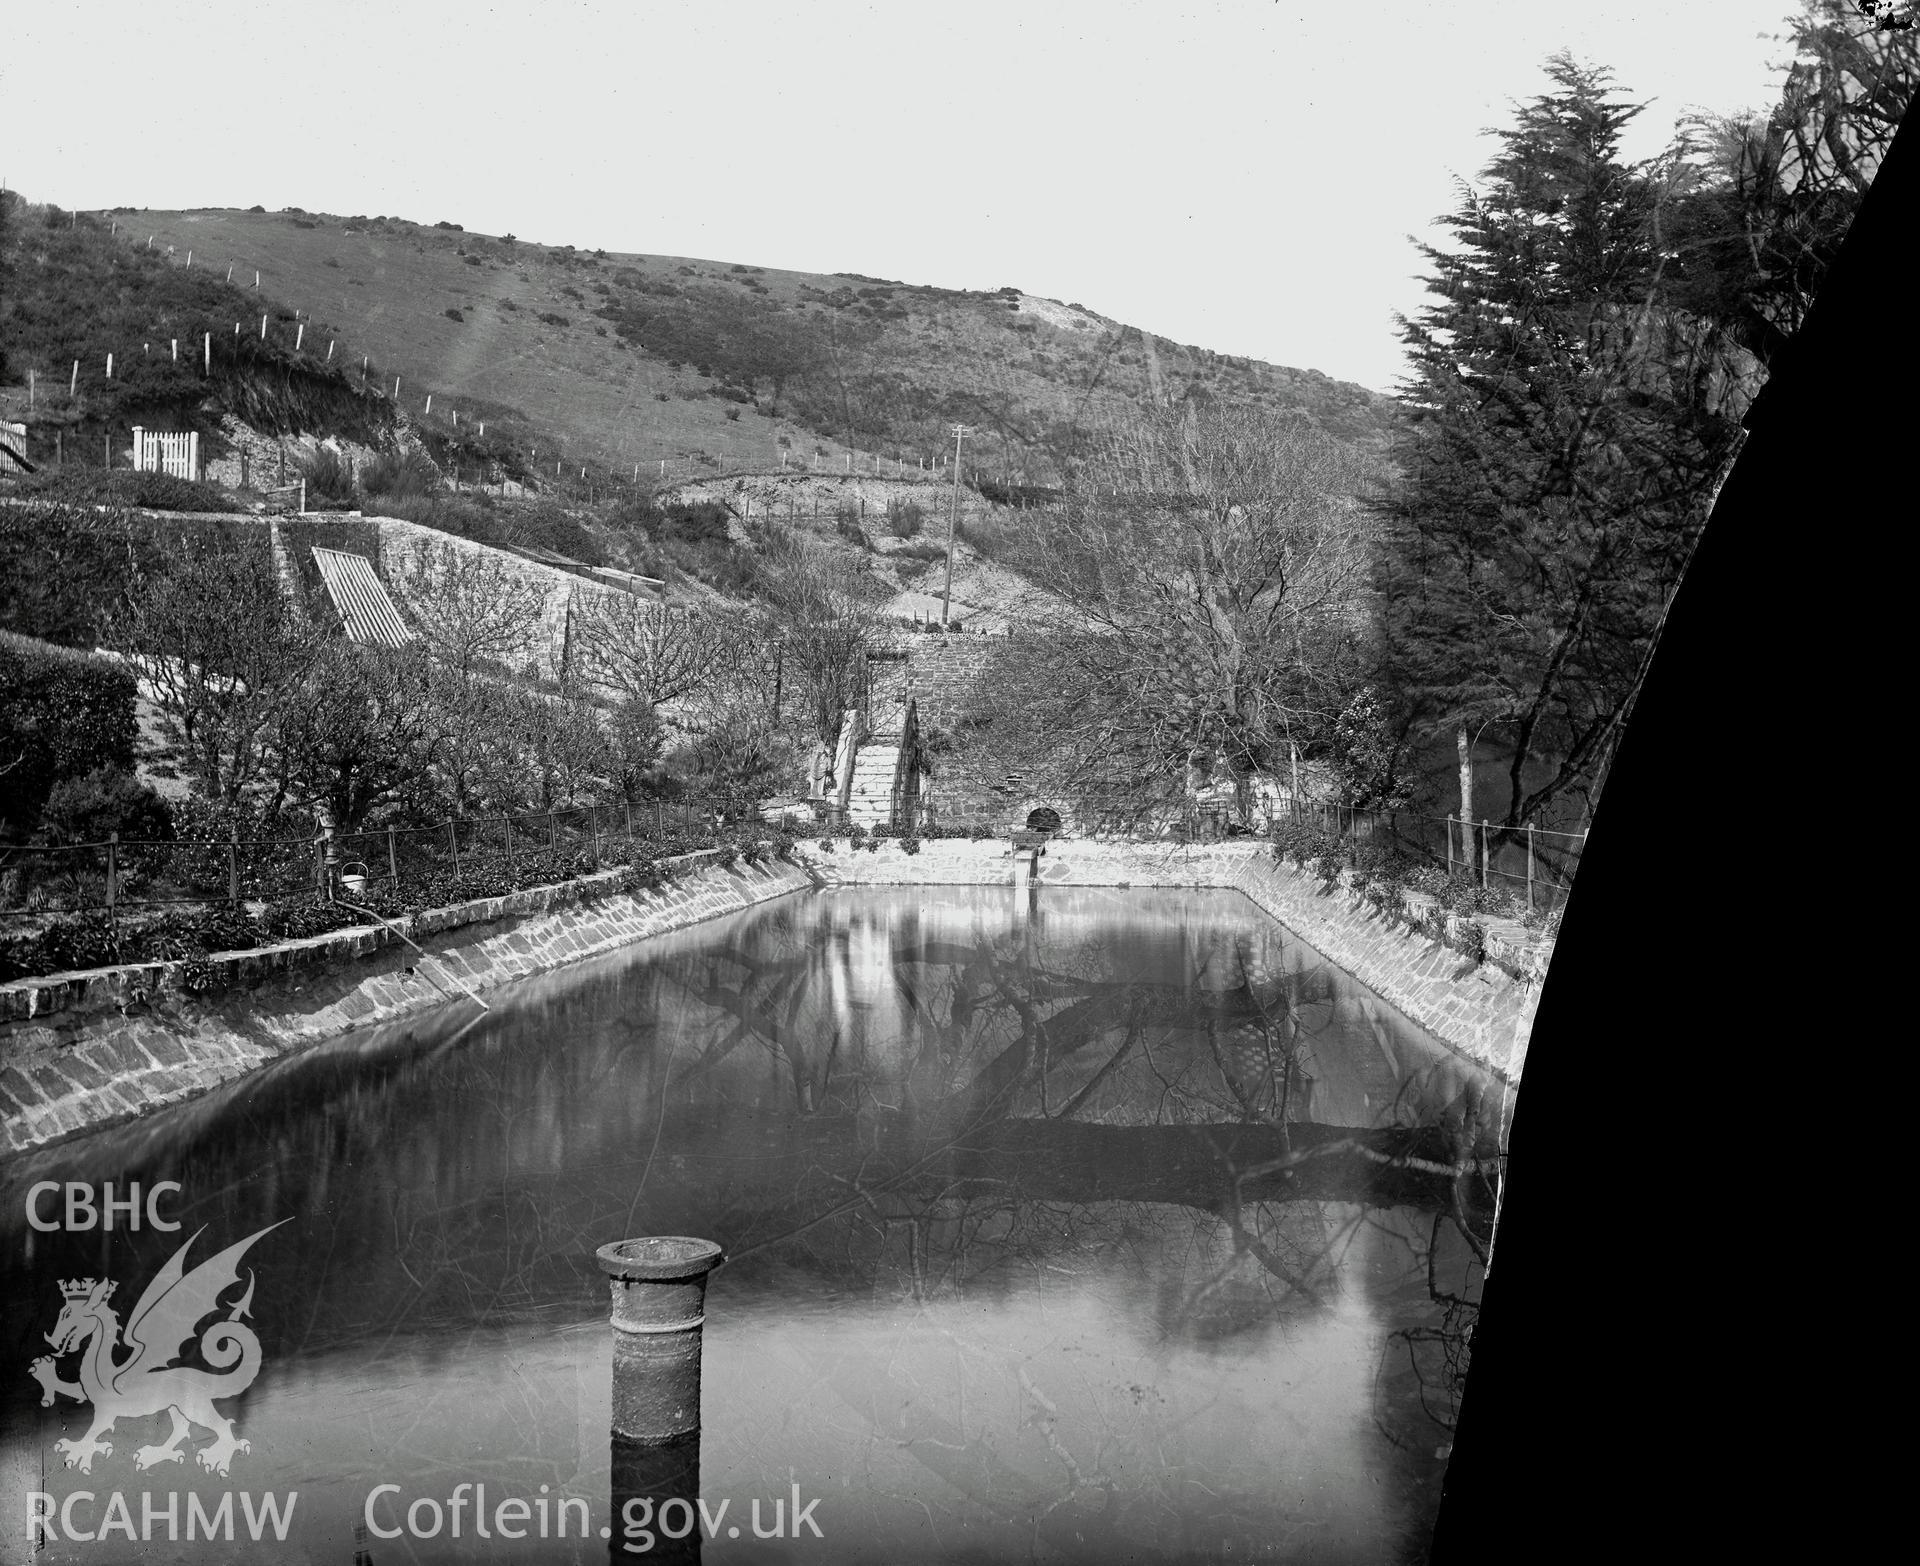 Black and white image dating from c.1910 showing Glyn y Gronfa Reservoir, Aberystwyth,  taken by Emile T. Evans.